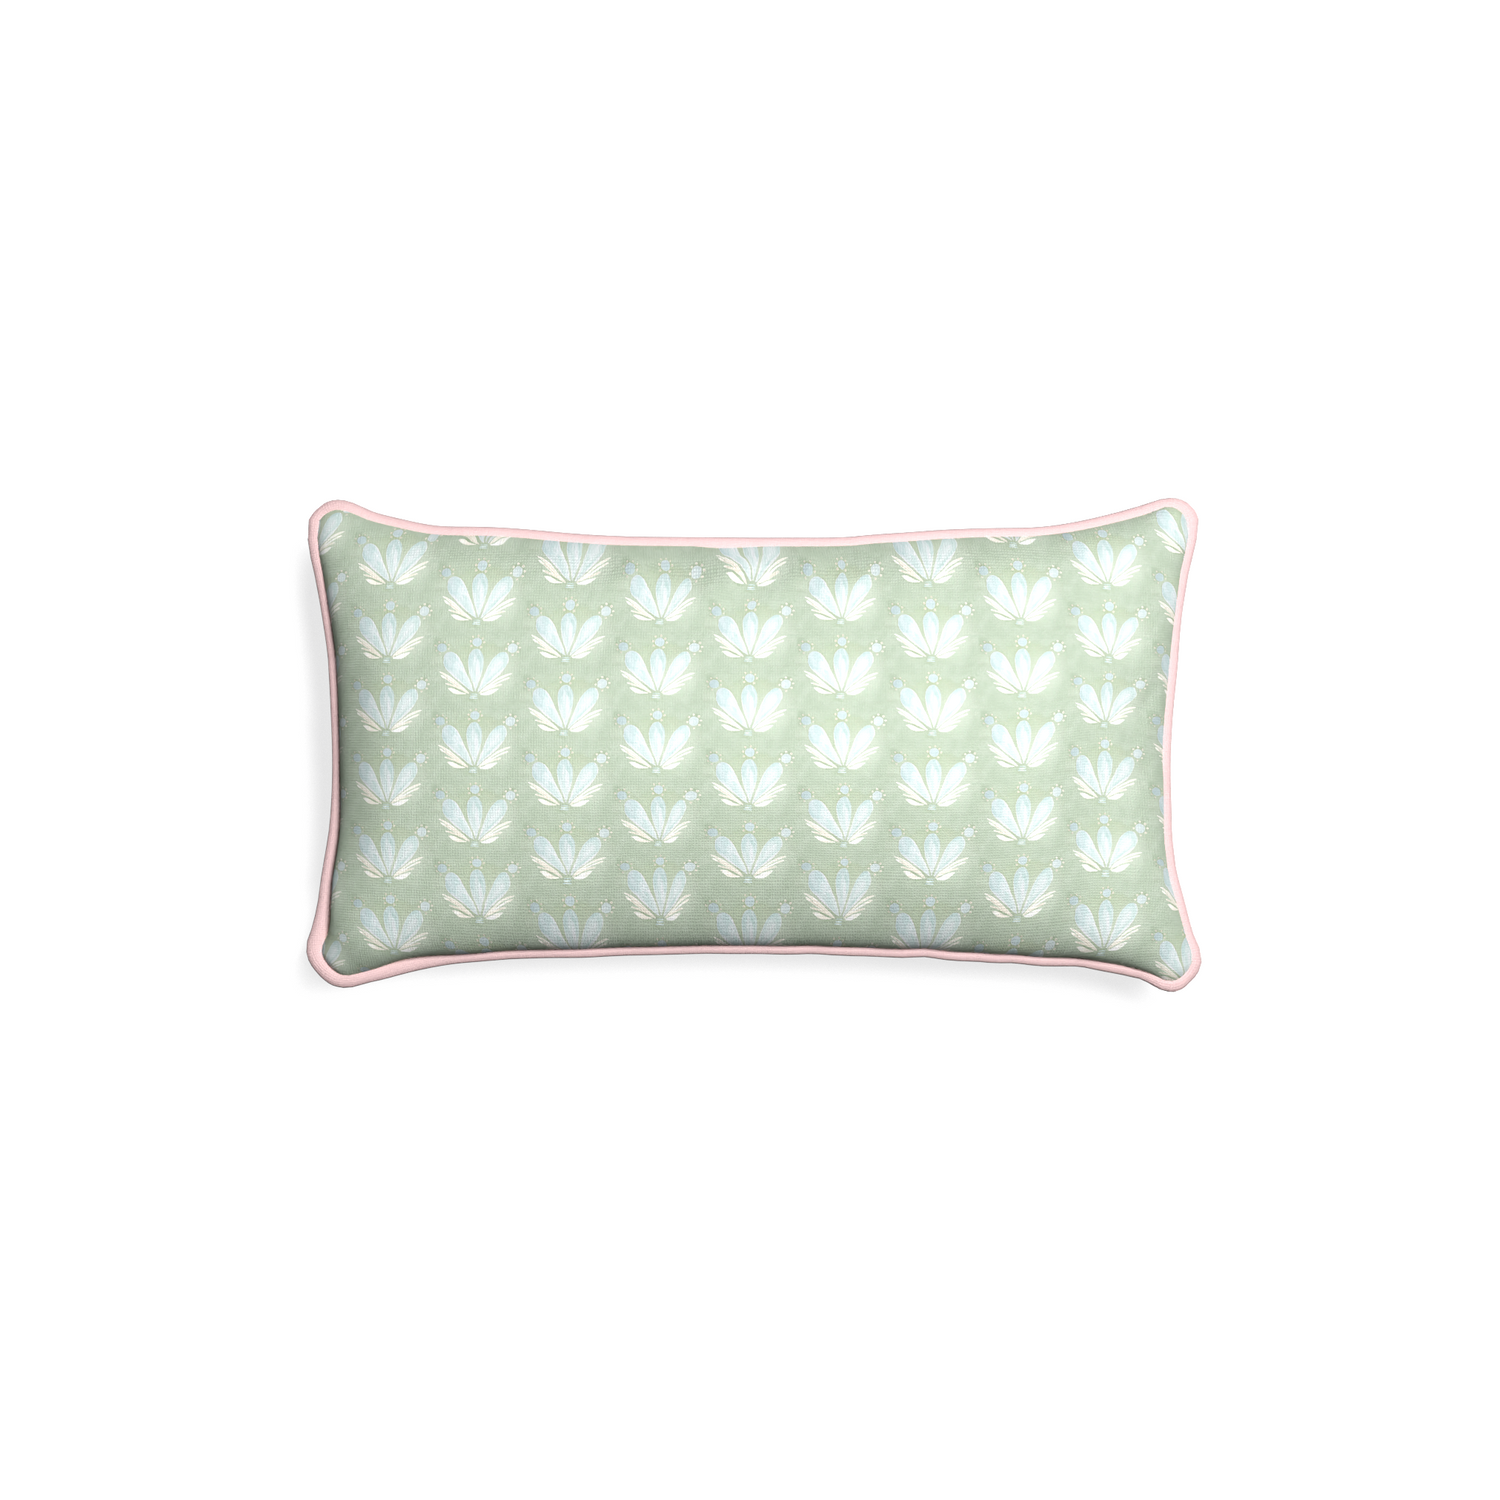 Petite-lumbar serena sea salt custom blue & green floral drop repeatpillow with petal piping on white background